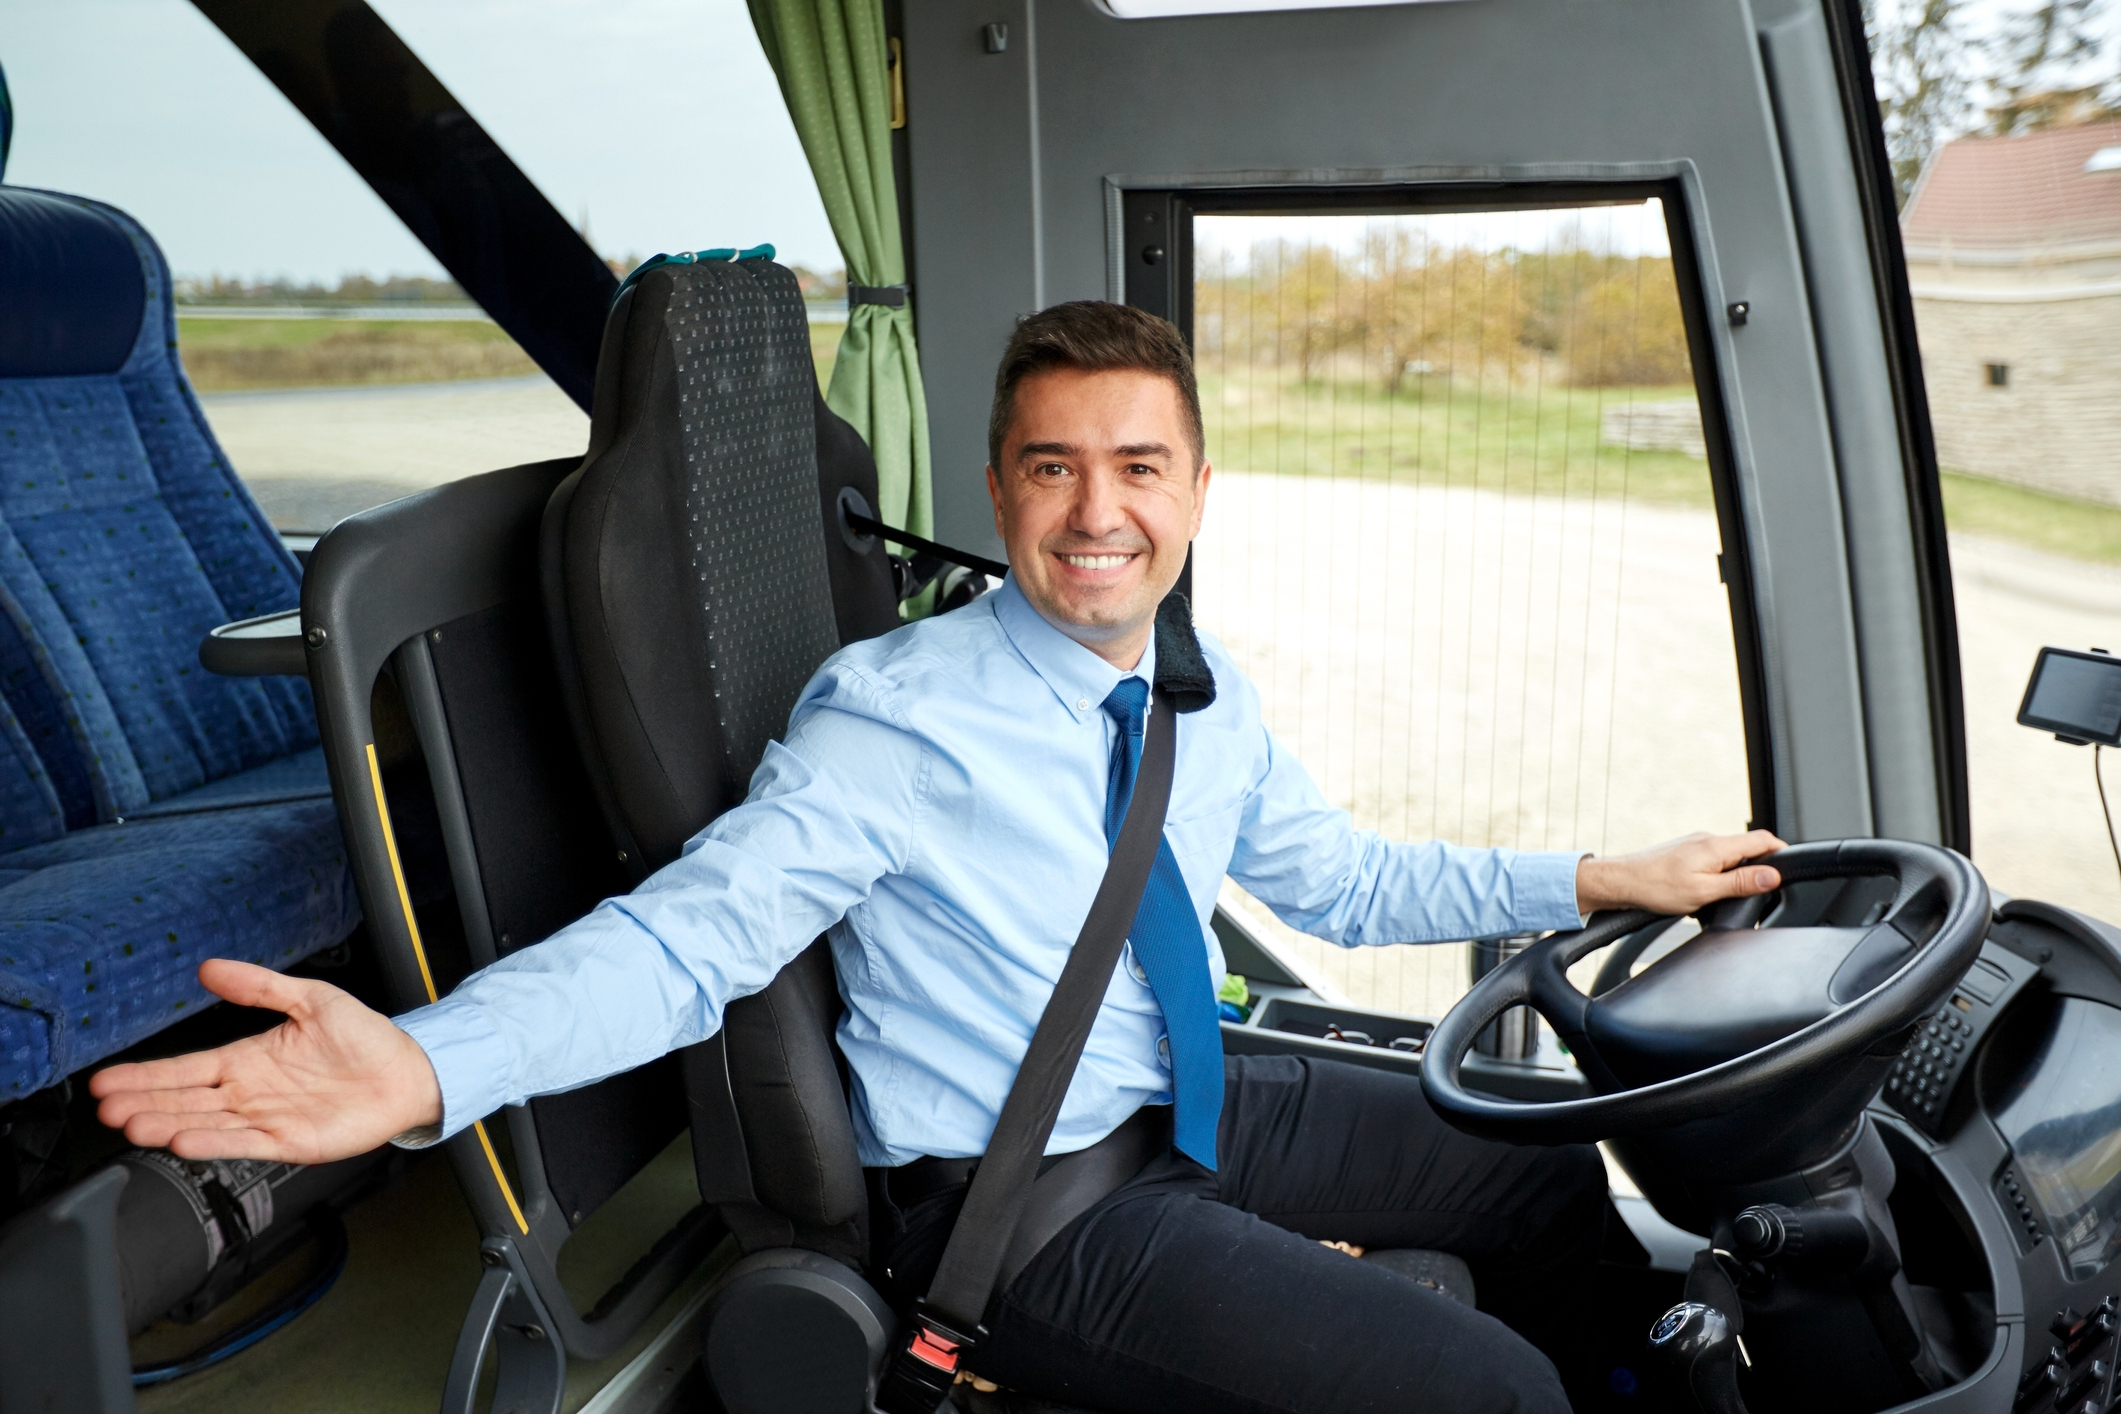 transport, tourism, road trip, gesture and people concept - happy driver inviting on board a tour bus